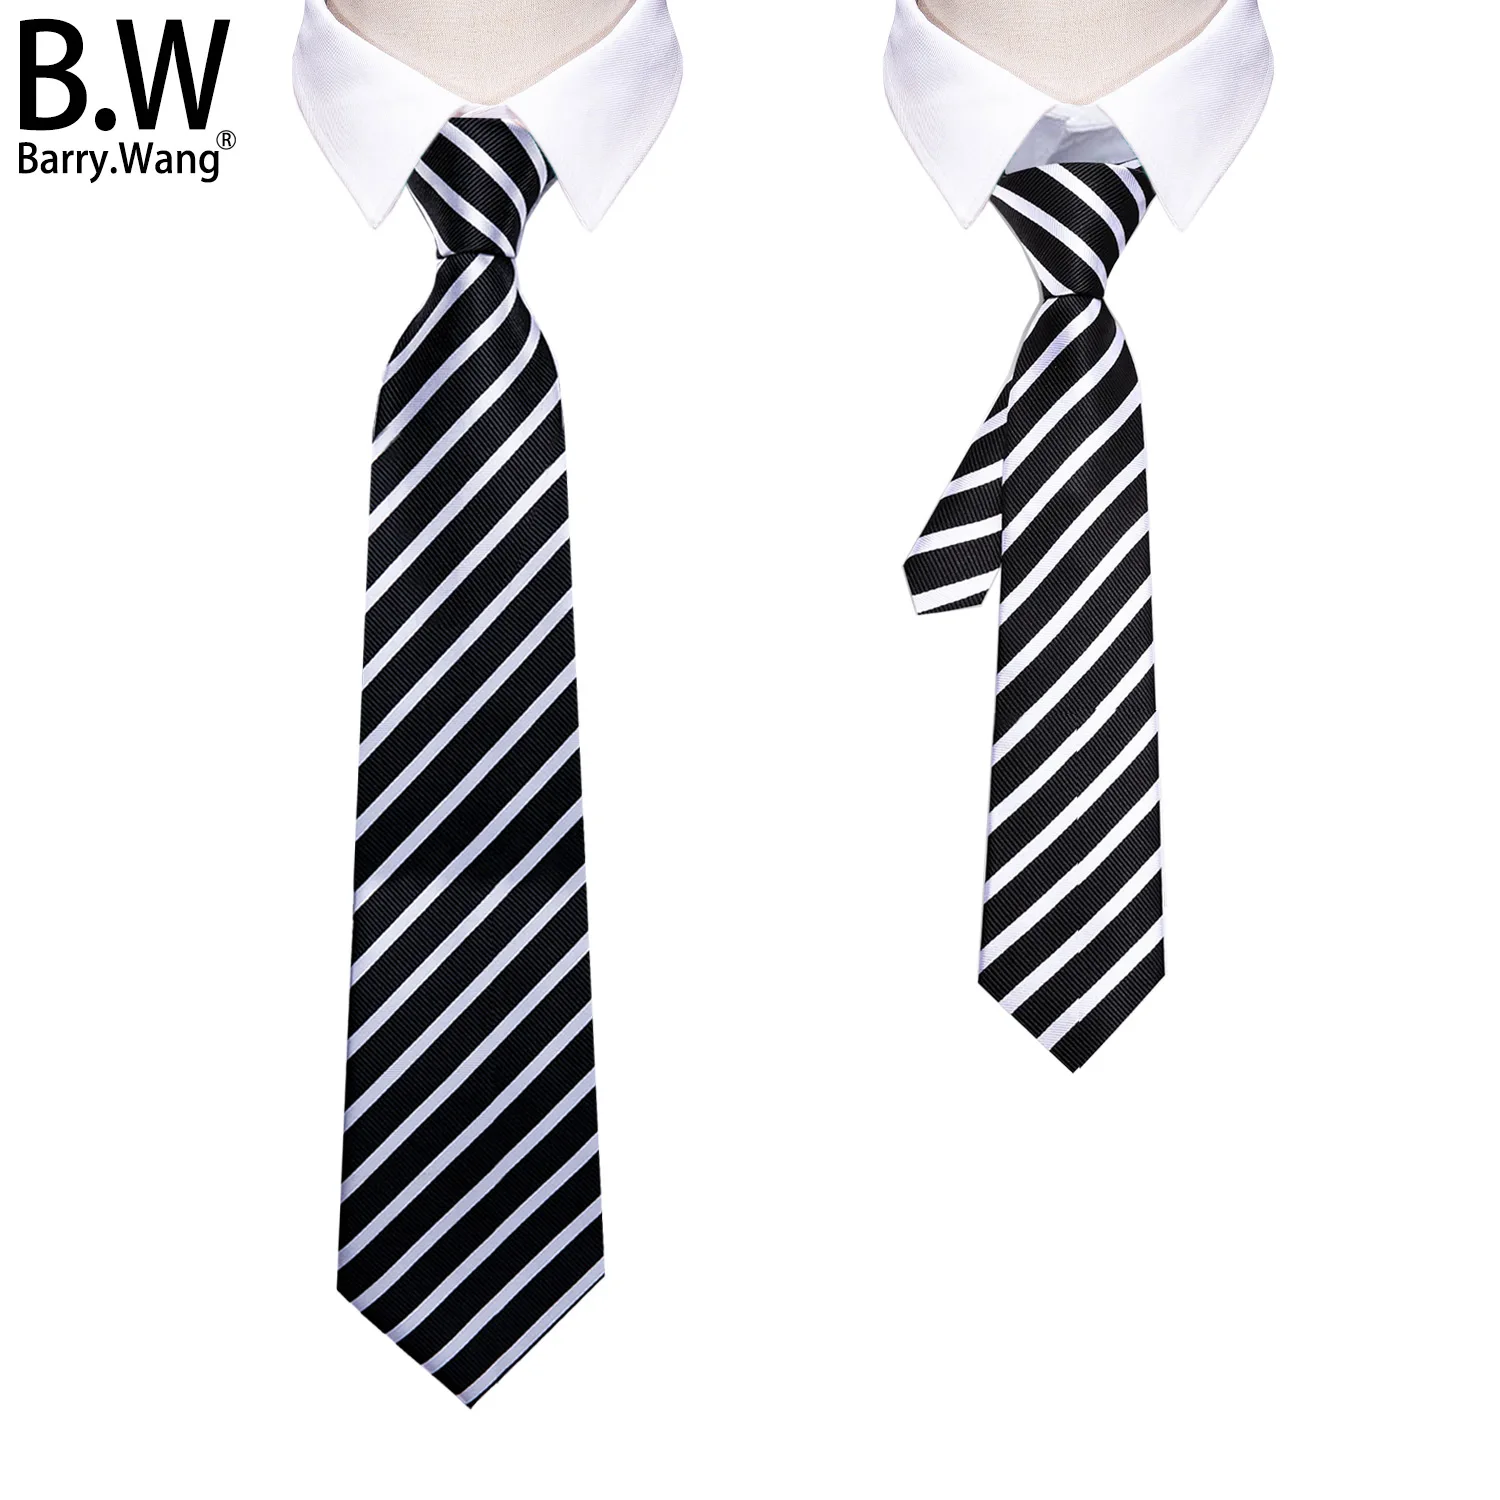 

Barry.Wang Tie for Dad and Son Jacquard Black Striped Silk Necktie Pocket Sqaure Parent-child Adult Boy Men Young Party Wedding